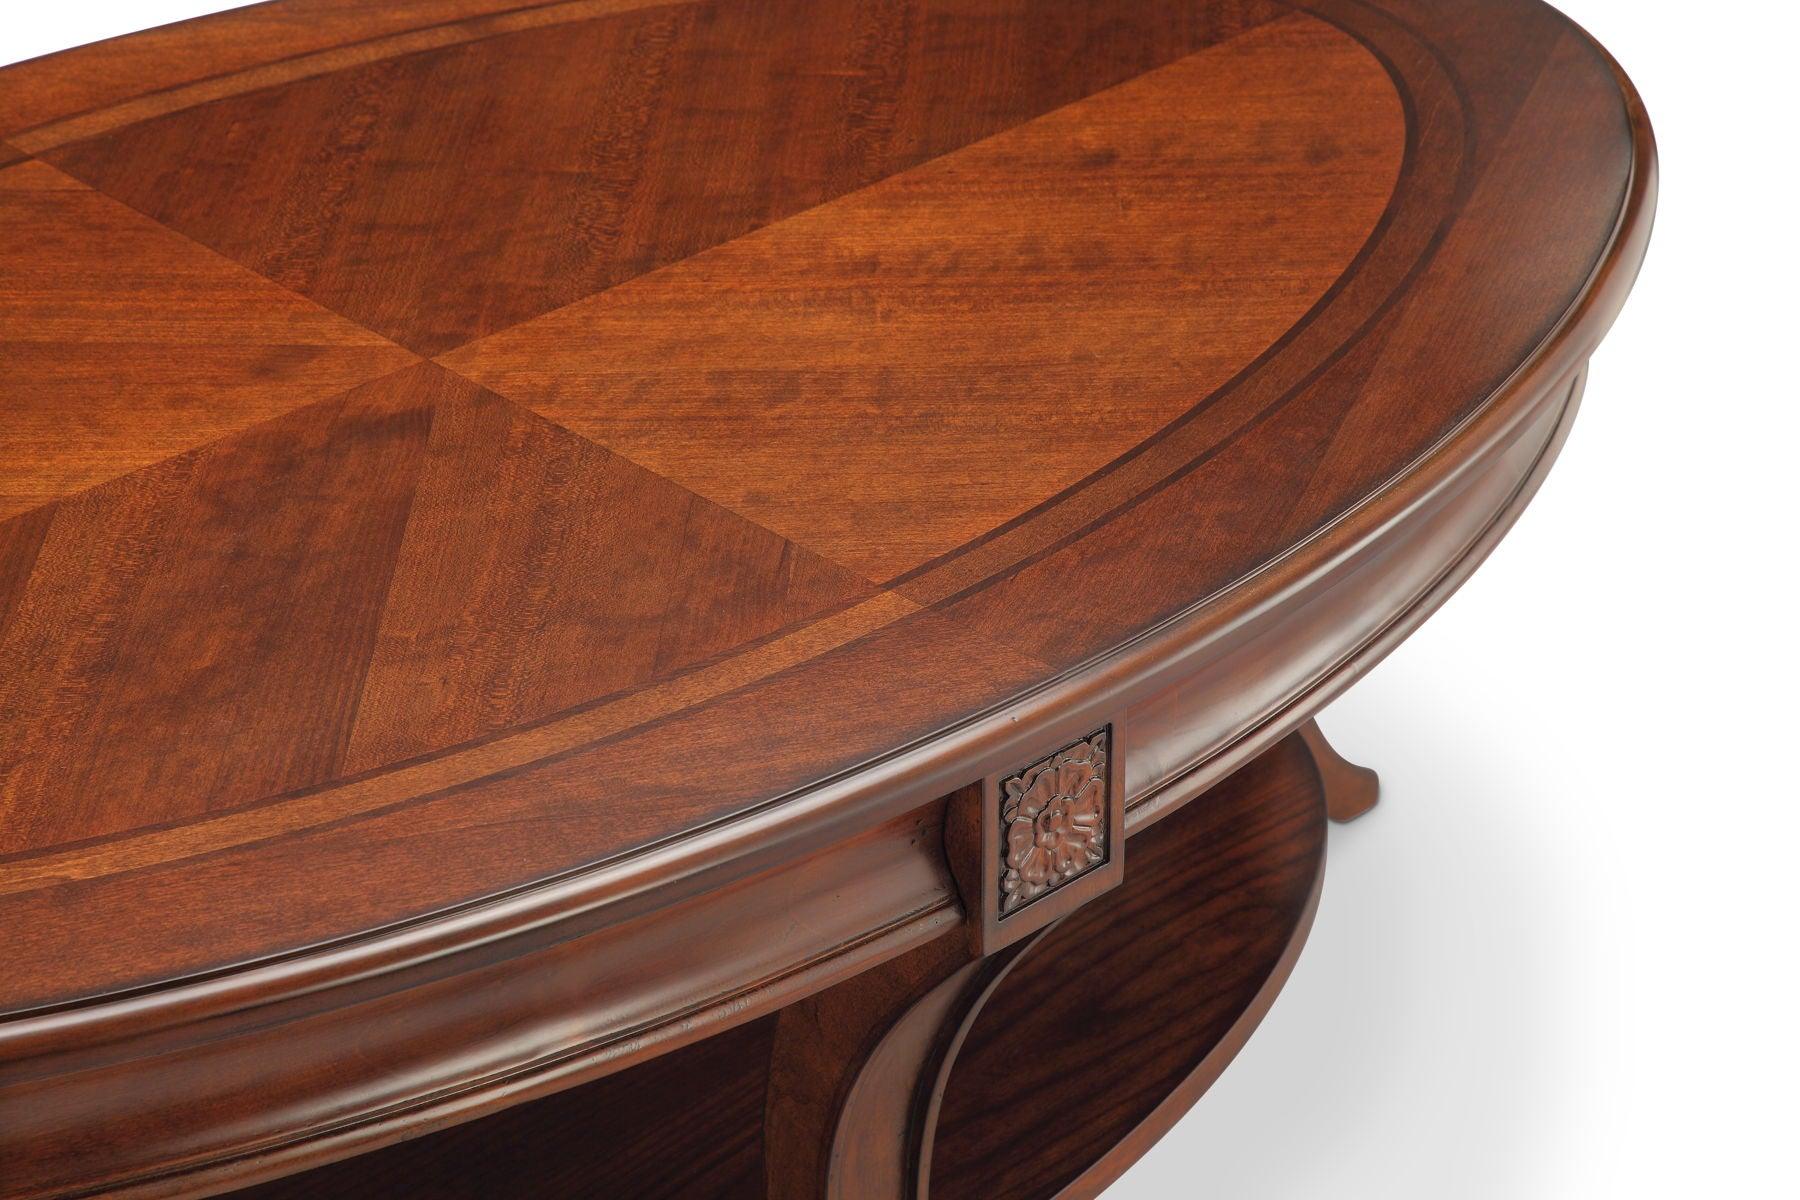 Magnussen Furniture - Winslet - Oval Cocktail Table (With Casters) - Cherry - 5th Avenue Furniture